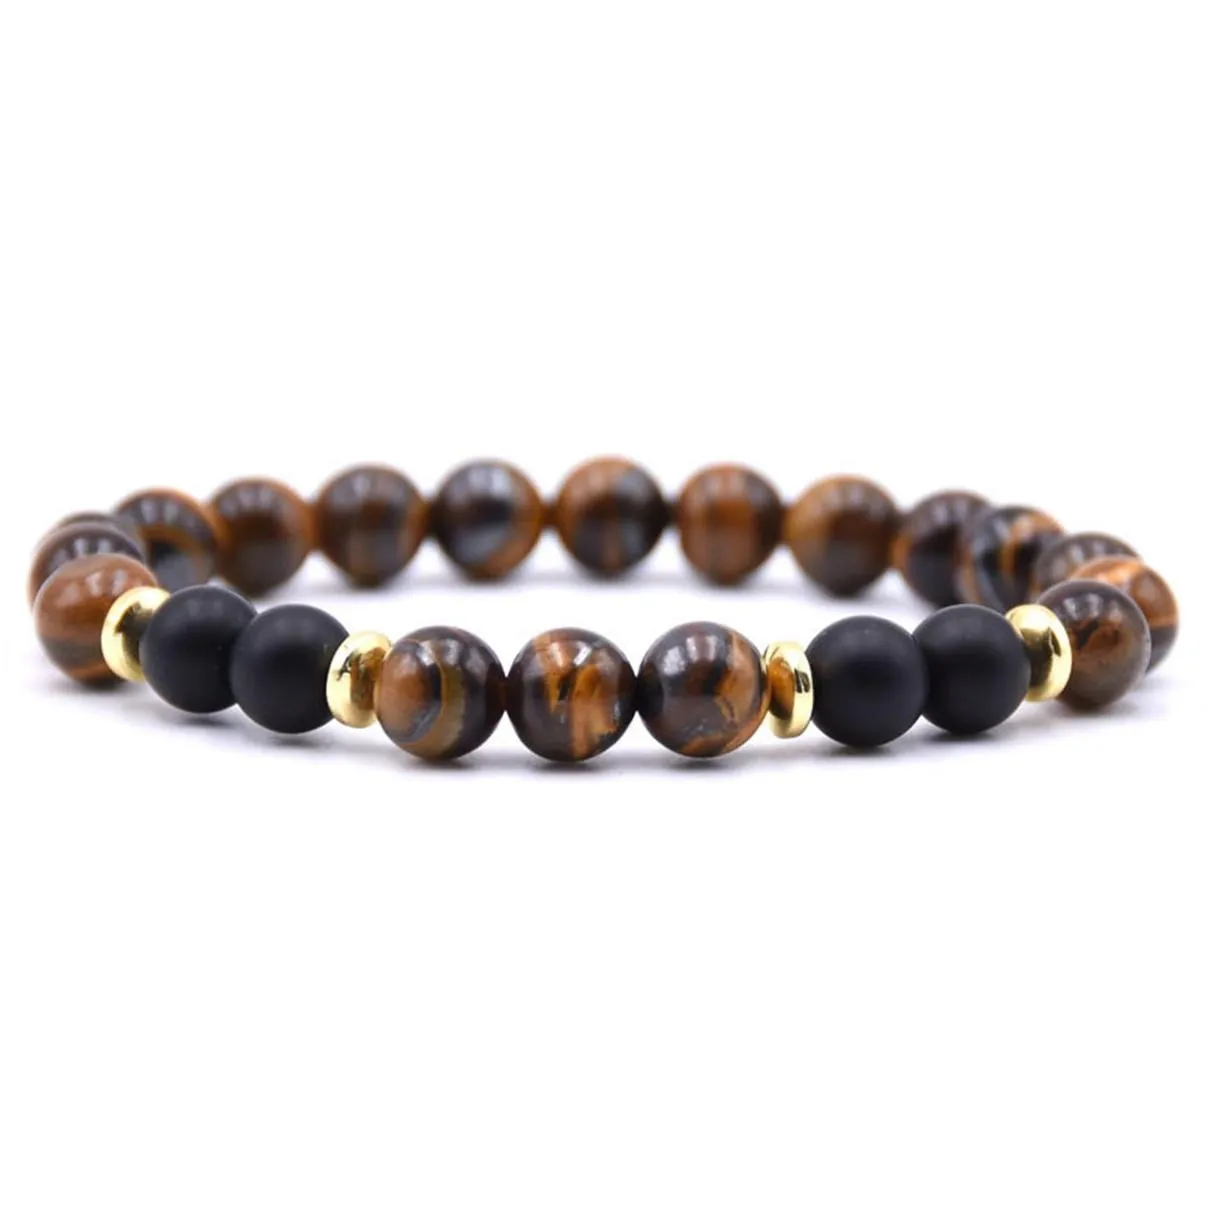 Stone bracelet with any four matte black agate men and women fashion accessories